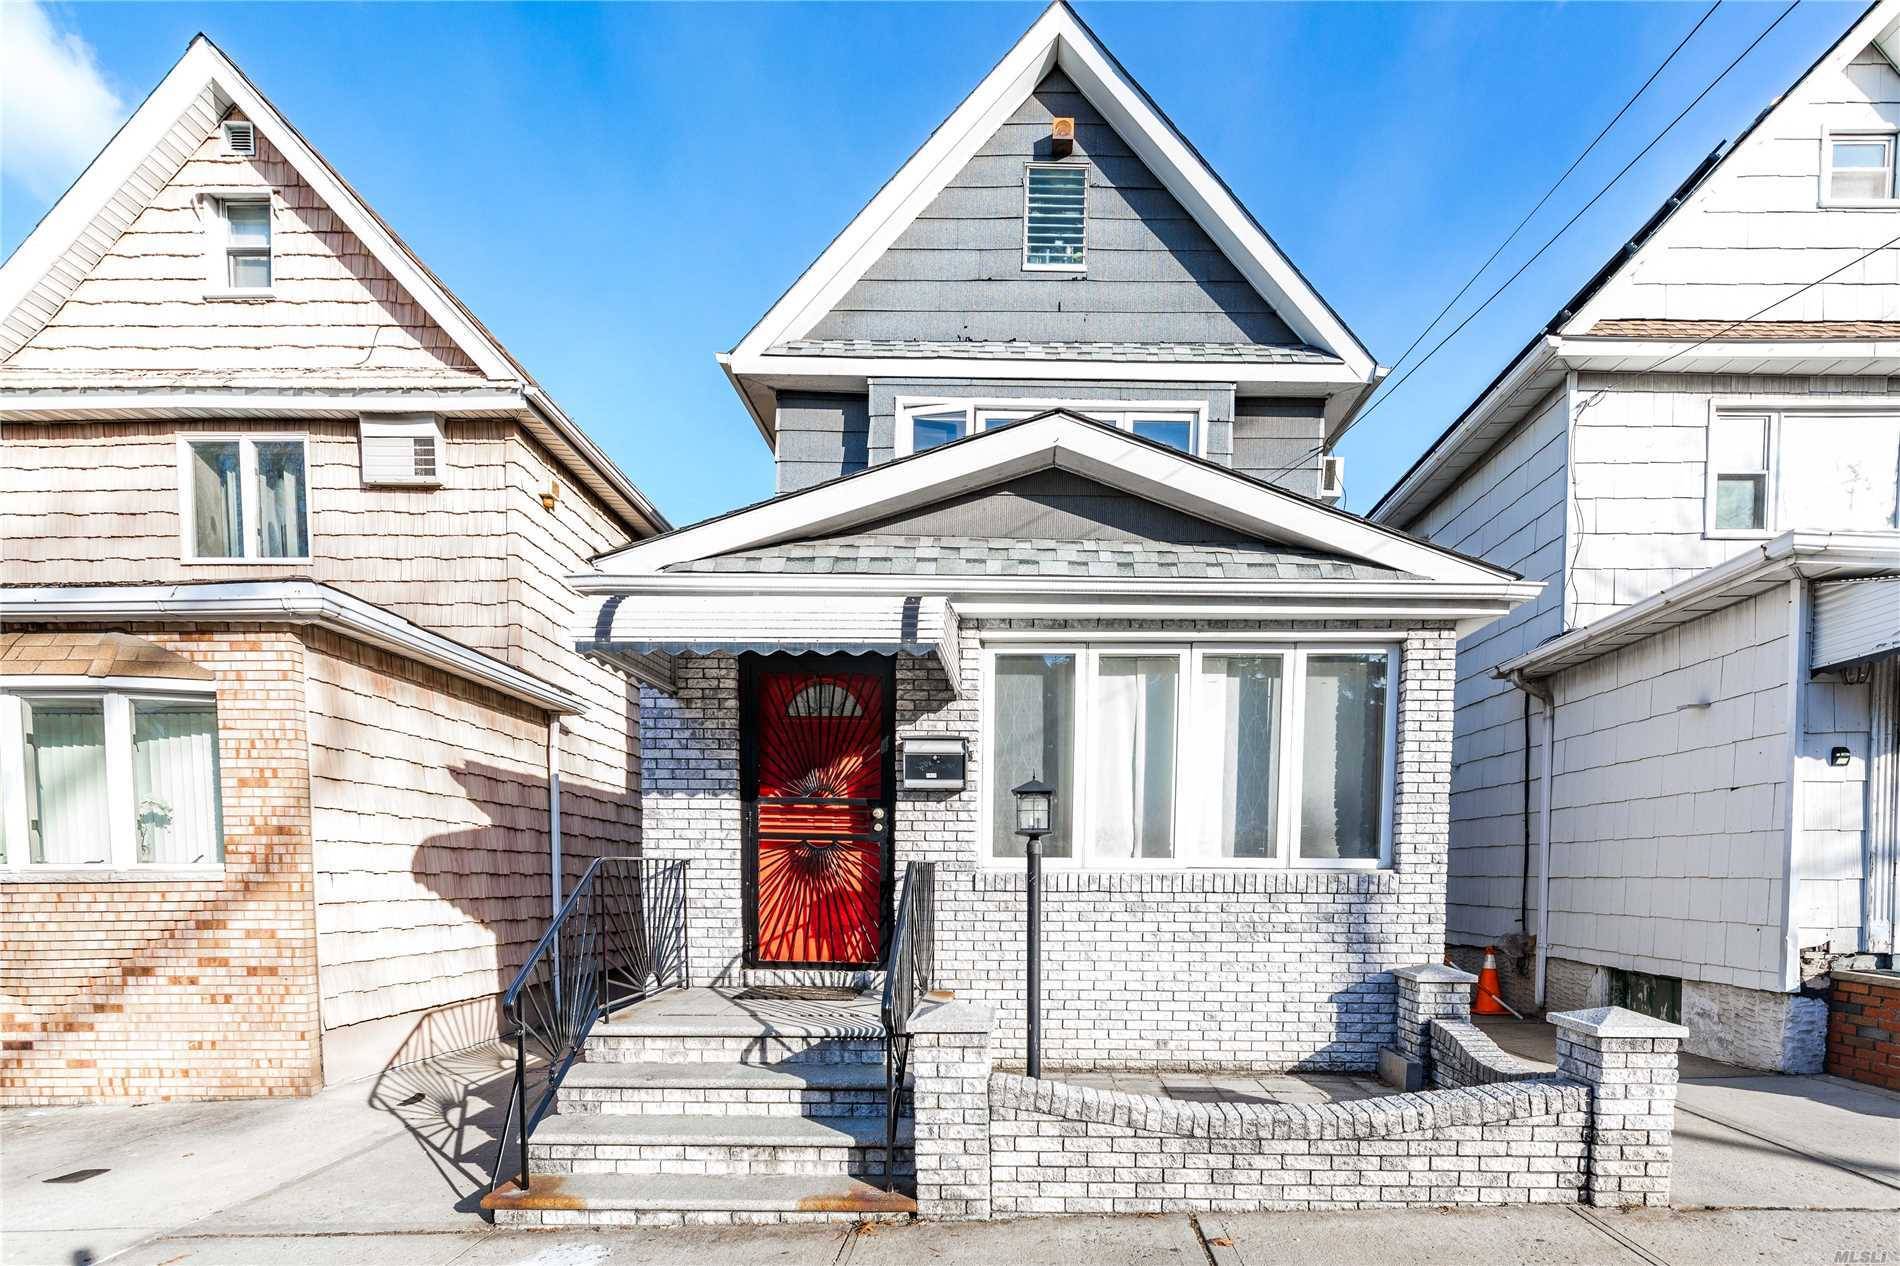 Stunning, Energy Efficient, Completely Renovated Single Family Detached Home On Oversize Lot With Amazing Outdoor Space Is Now Available In Maspeth.